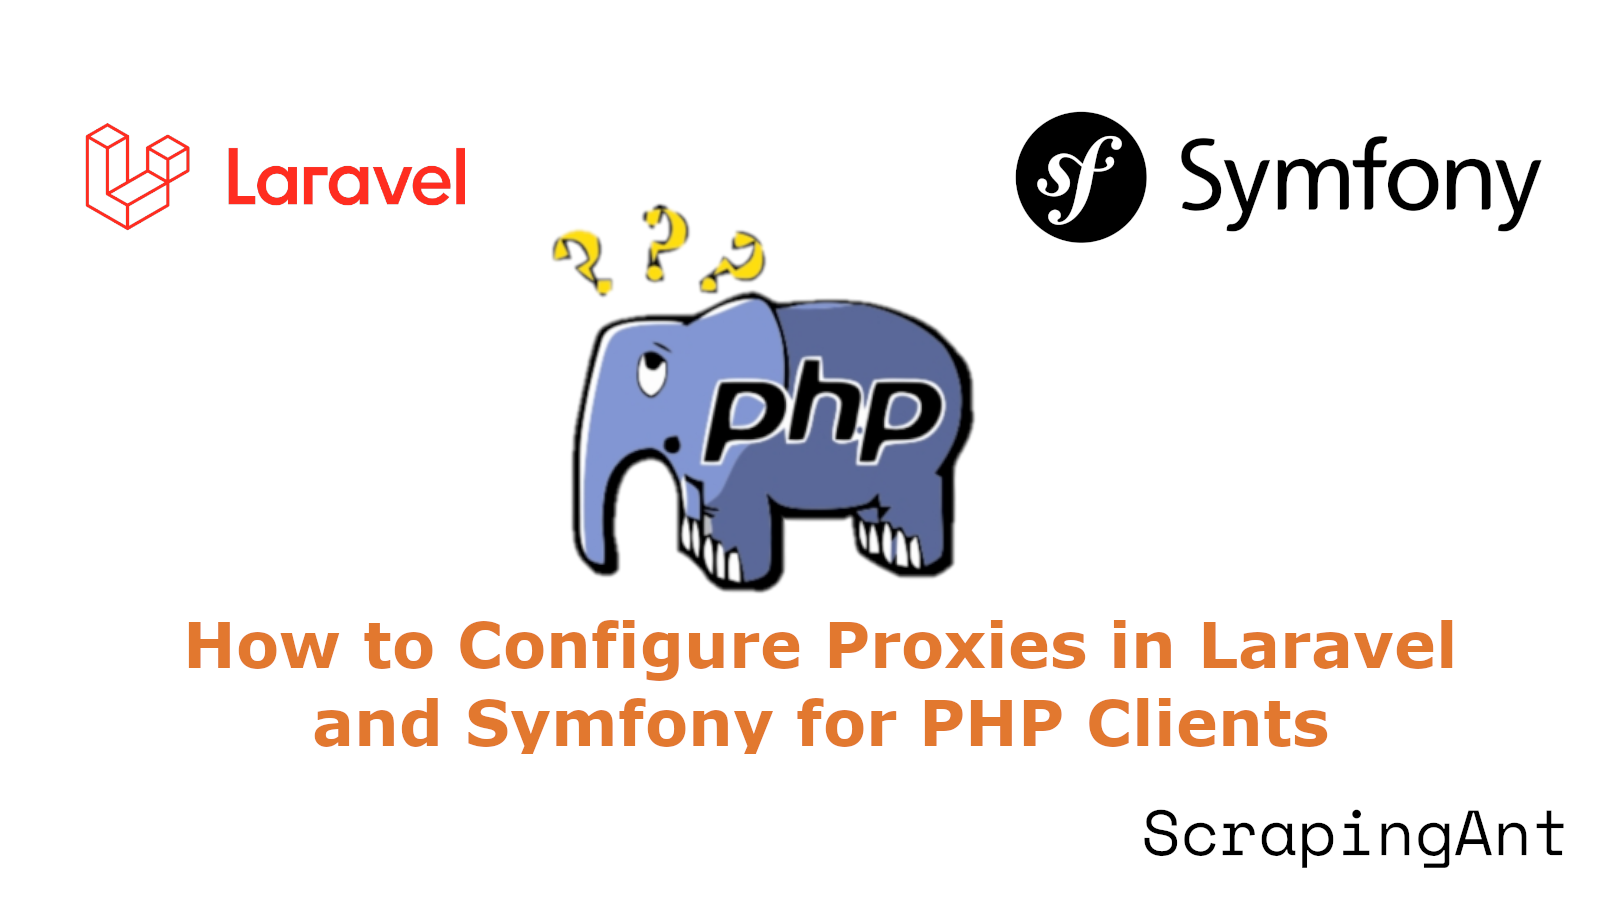 How to Configure Proxies in Laravel and Symfony for PHP Clients